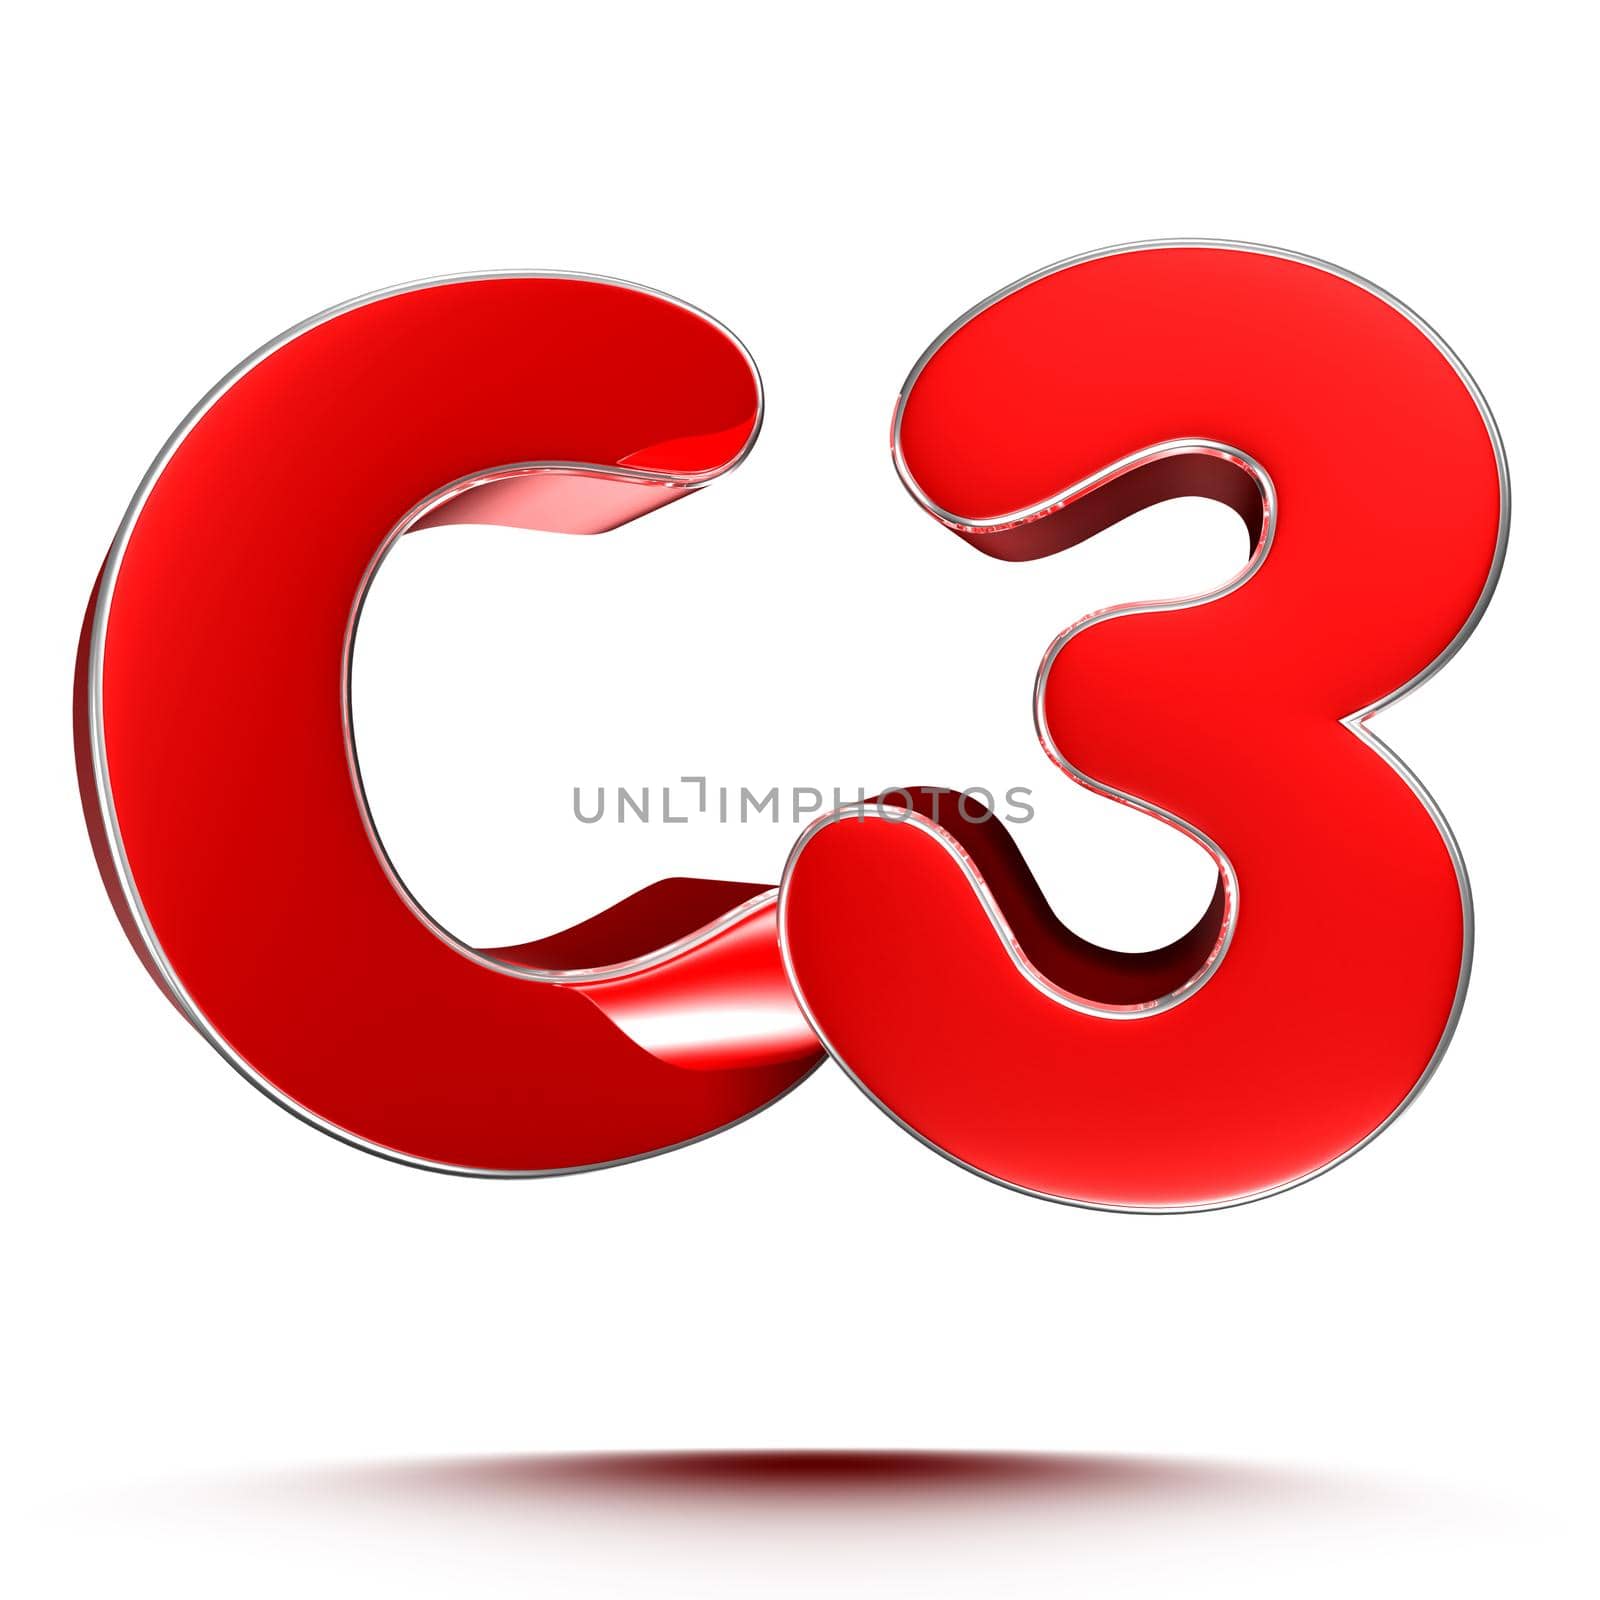 C3 red 3D illustration on white background with clipping path. by thitimontoyai